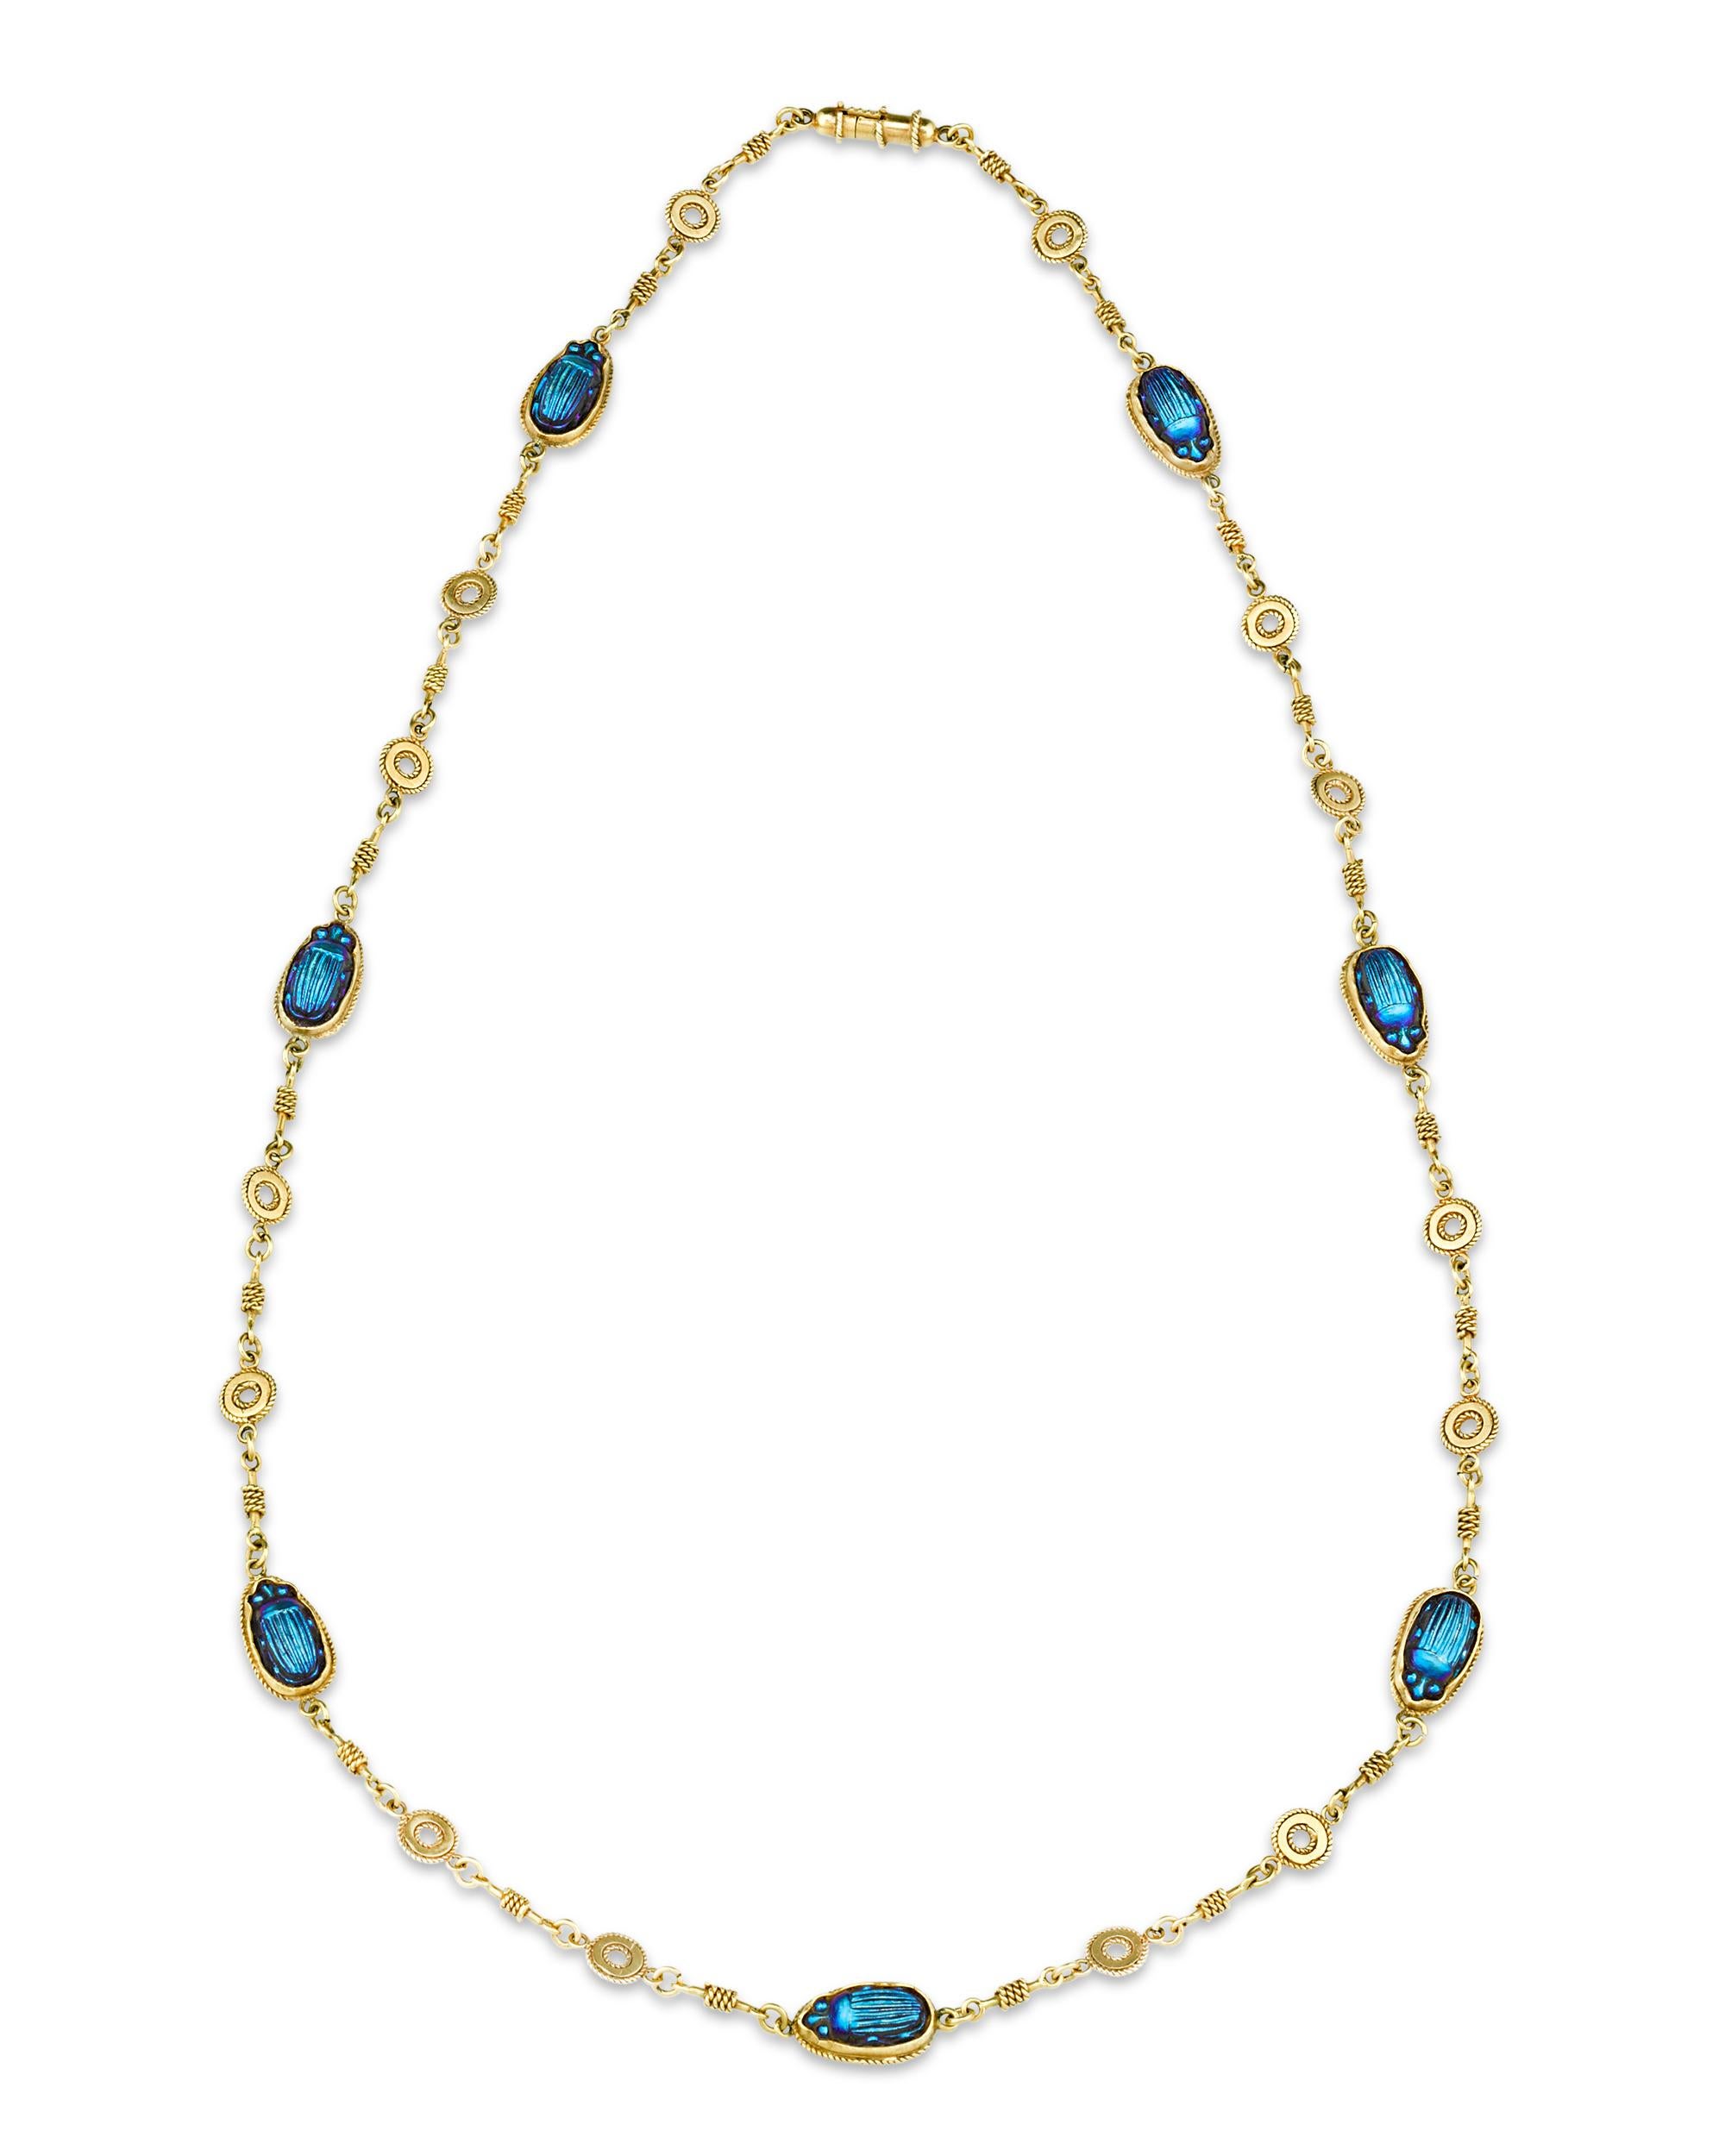 Created by legendary designer and premier tastemaker of the Gilded Age, Louis Comfort Tiffany, this necklace is a rare and unique masterpiece of jewelry design. Delicately crafted, the necklace boasts an Egyptian Revival design inspired by the